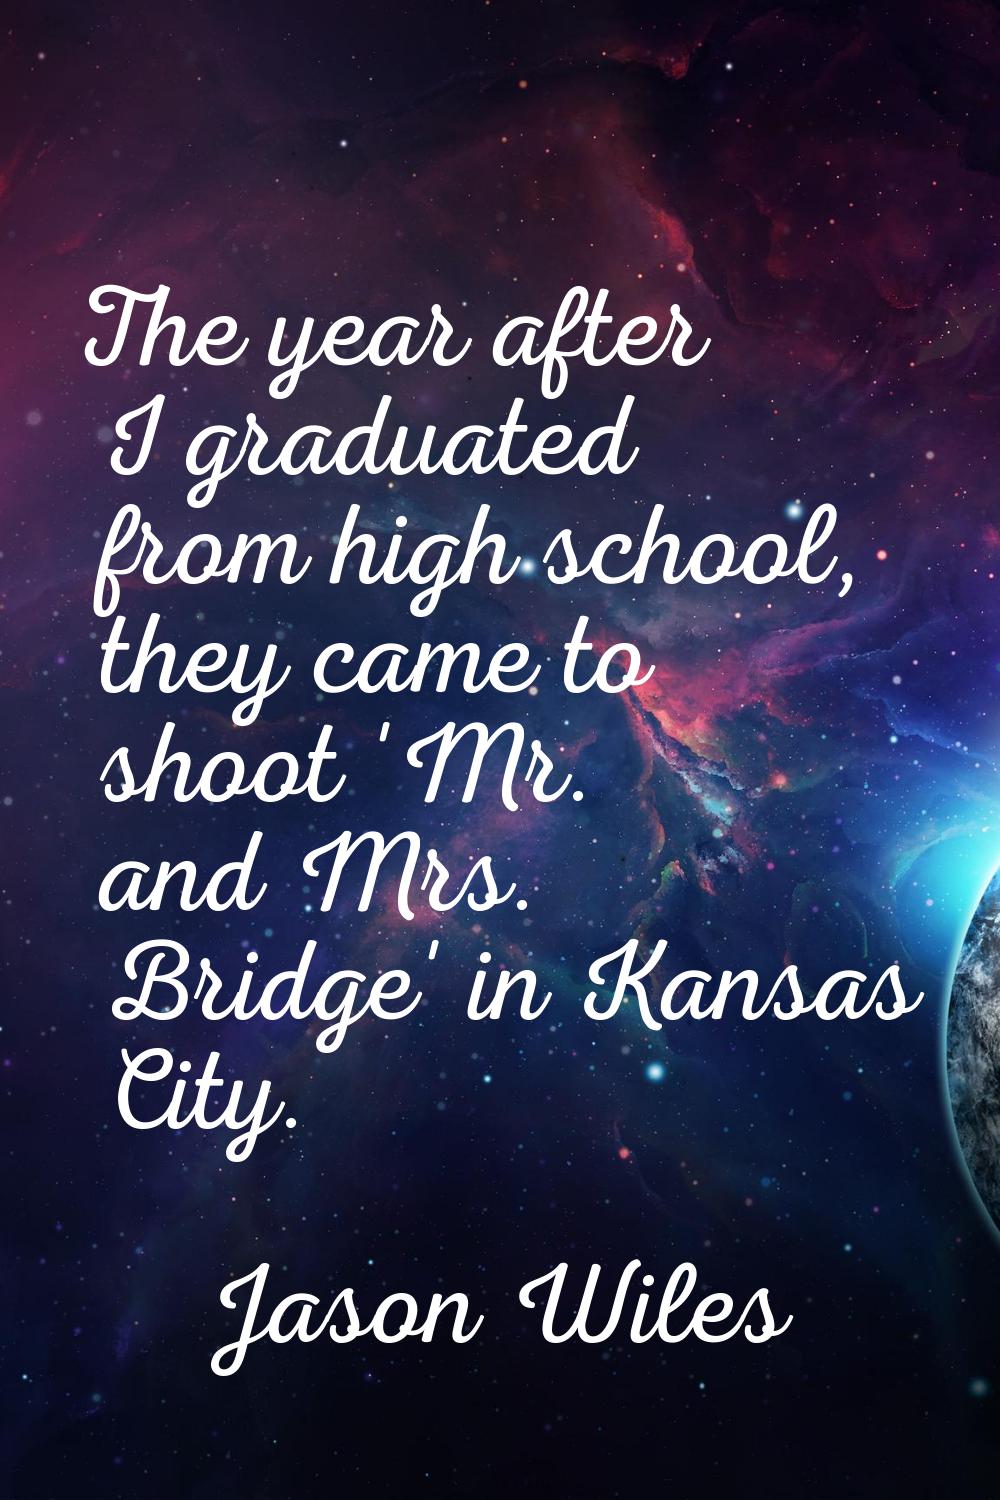 The year after I graduated from high school, they came to shoot 'Mr. and Mrs. Bridge' in Kansas Cit